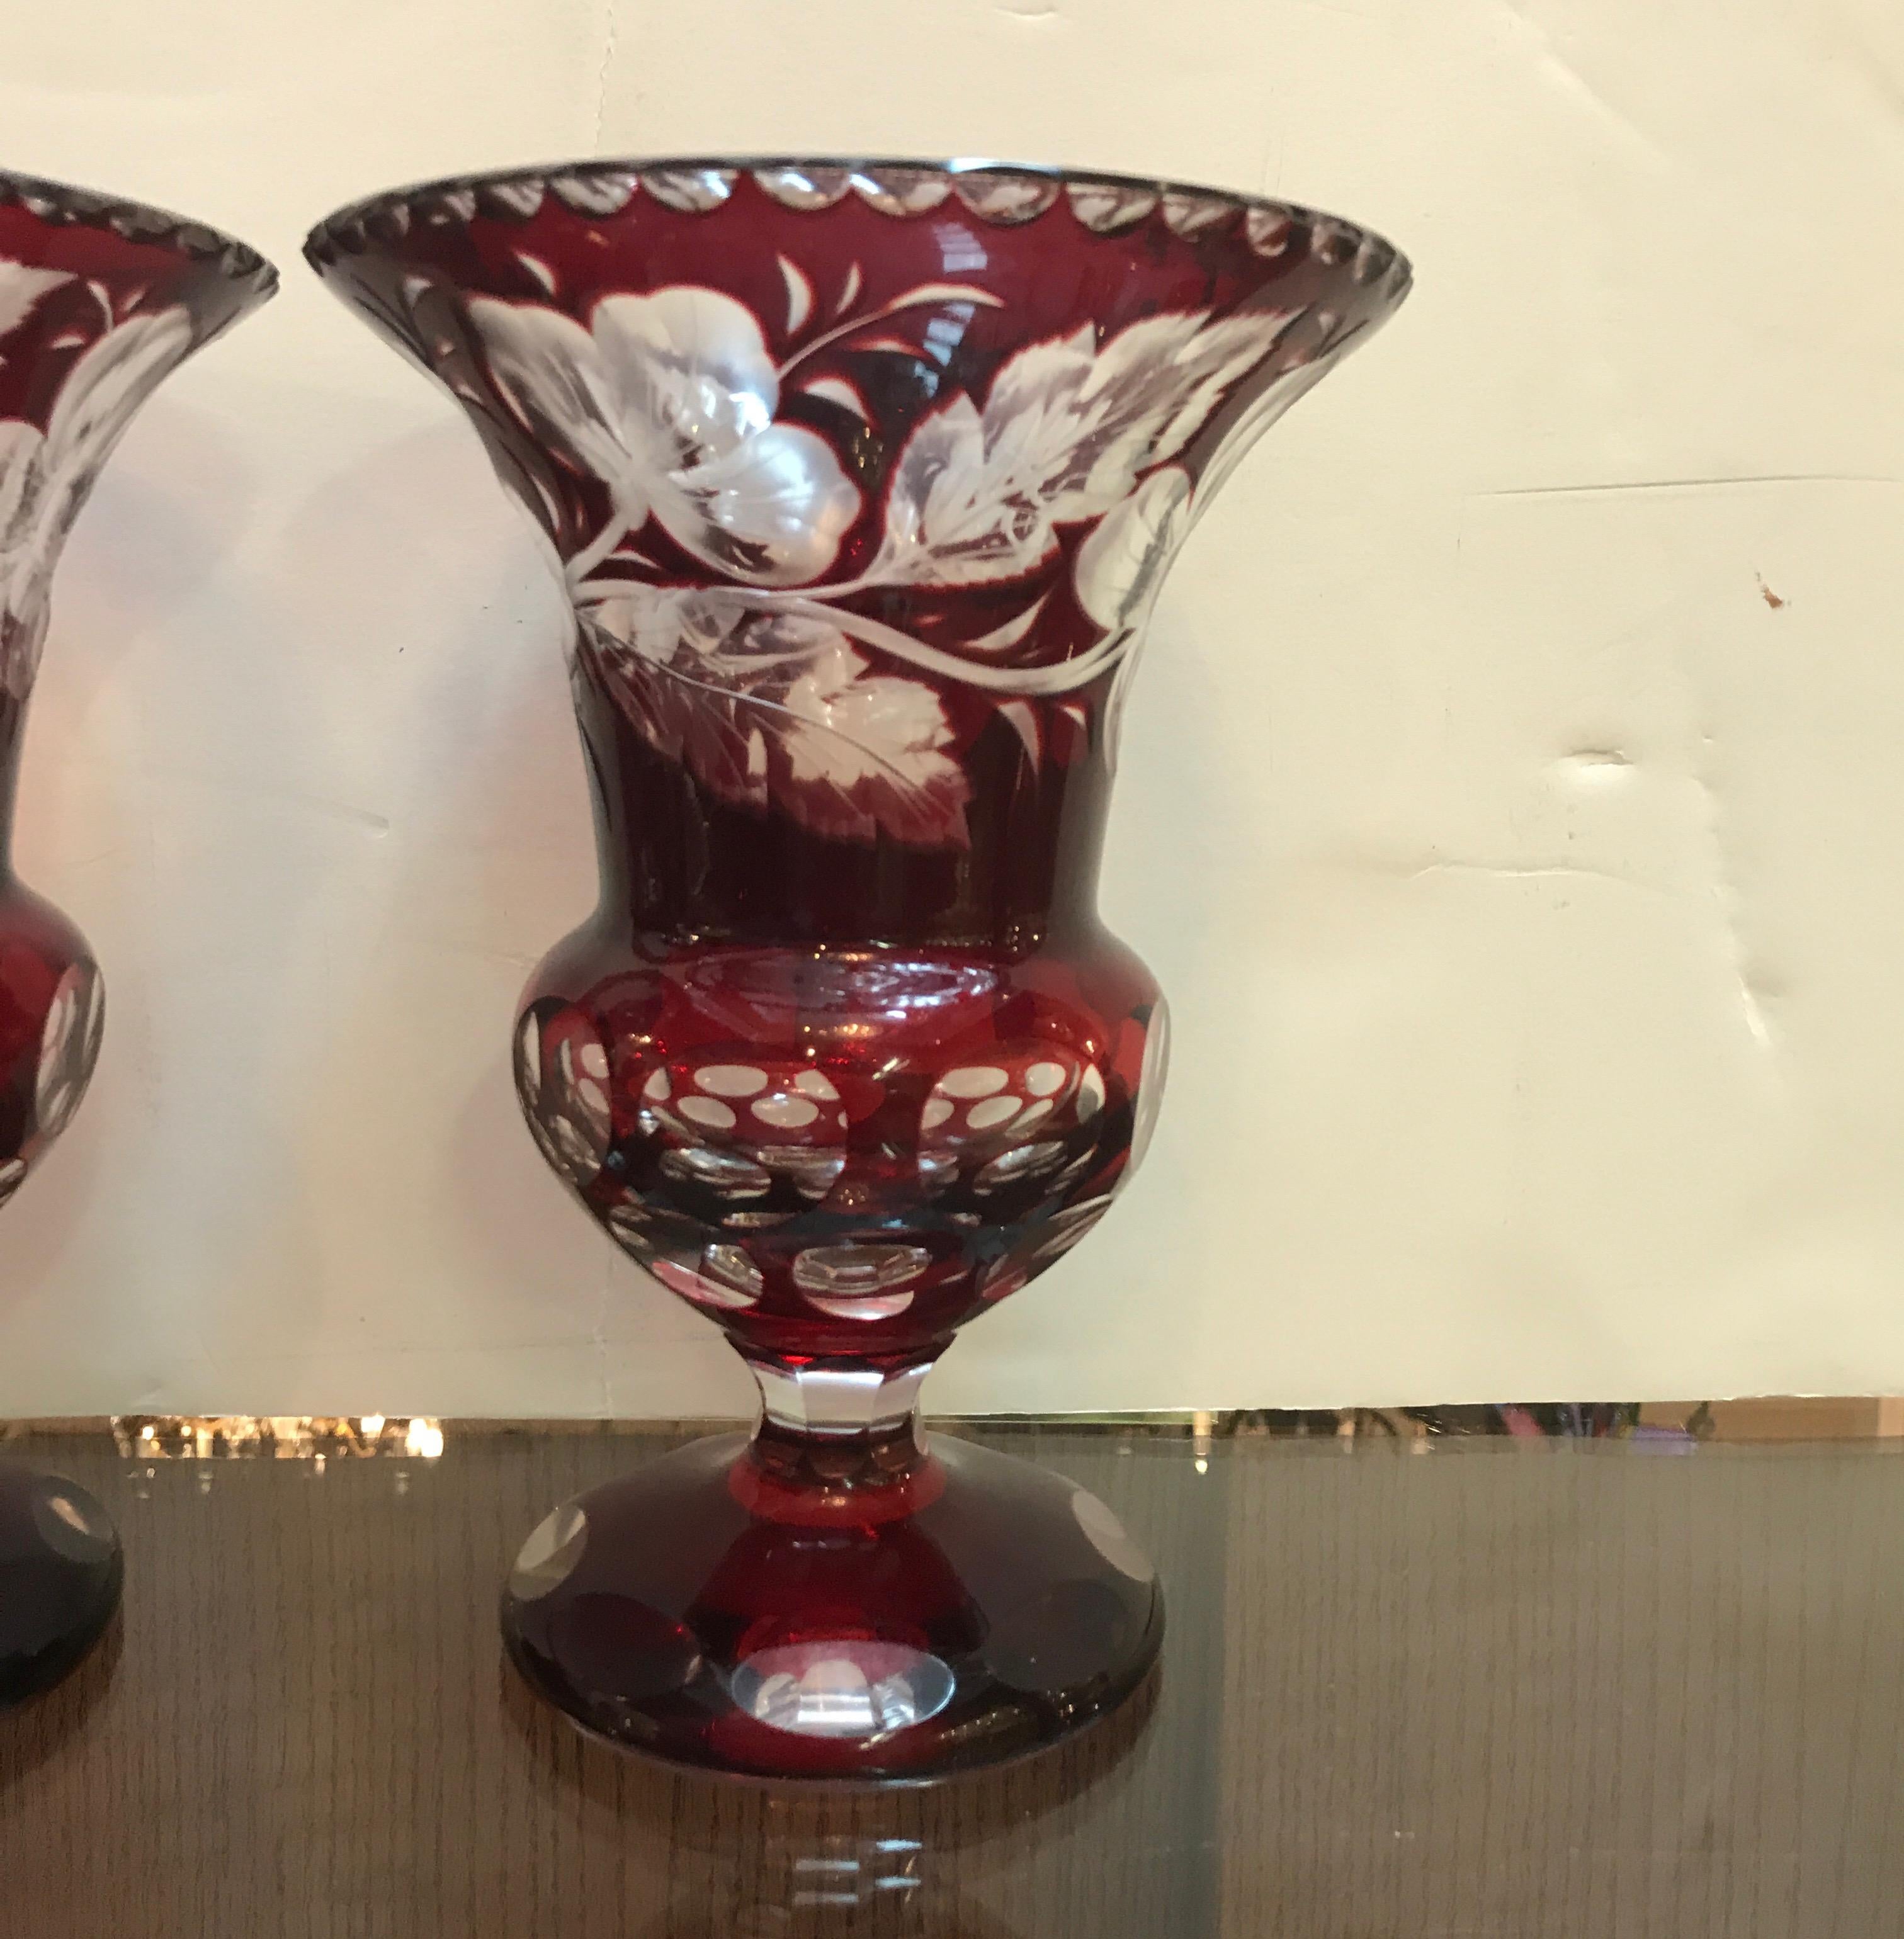 A pair of intaglio cut-glass ruby cased over clear. The Campana urn form with cased ruby glass intaglio cut to reveal the clear base. Elegant and formal with notched top edge, floral and leaf pattern on the main body with optic cut circles on the